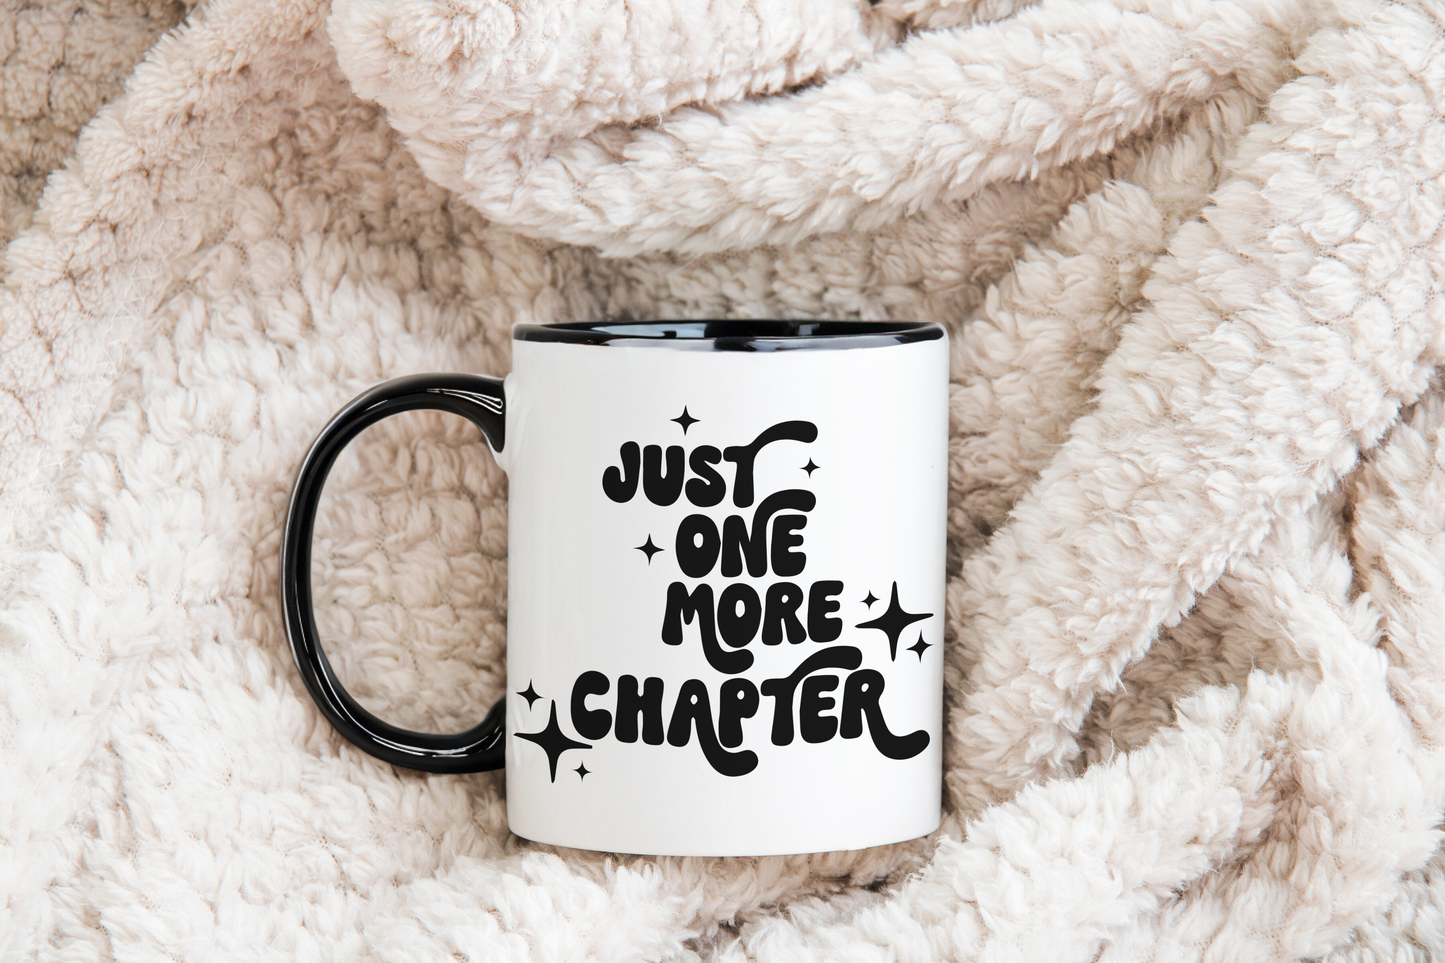 Bookish mok - "Just One More Chapter"